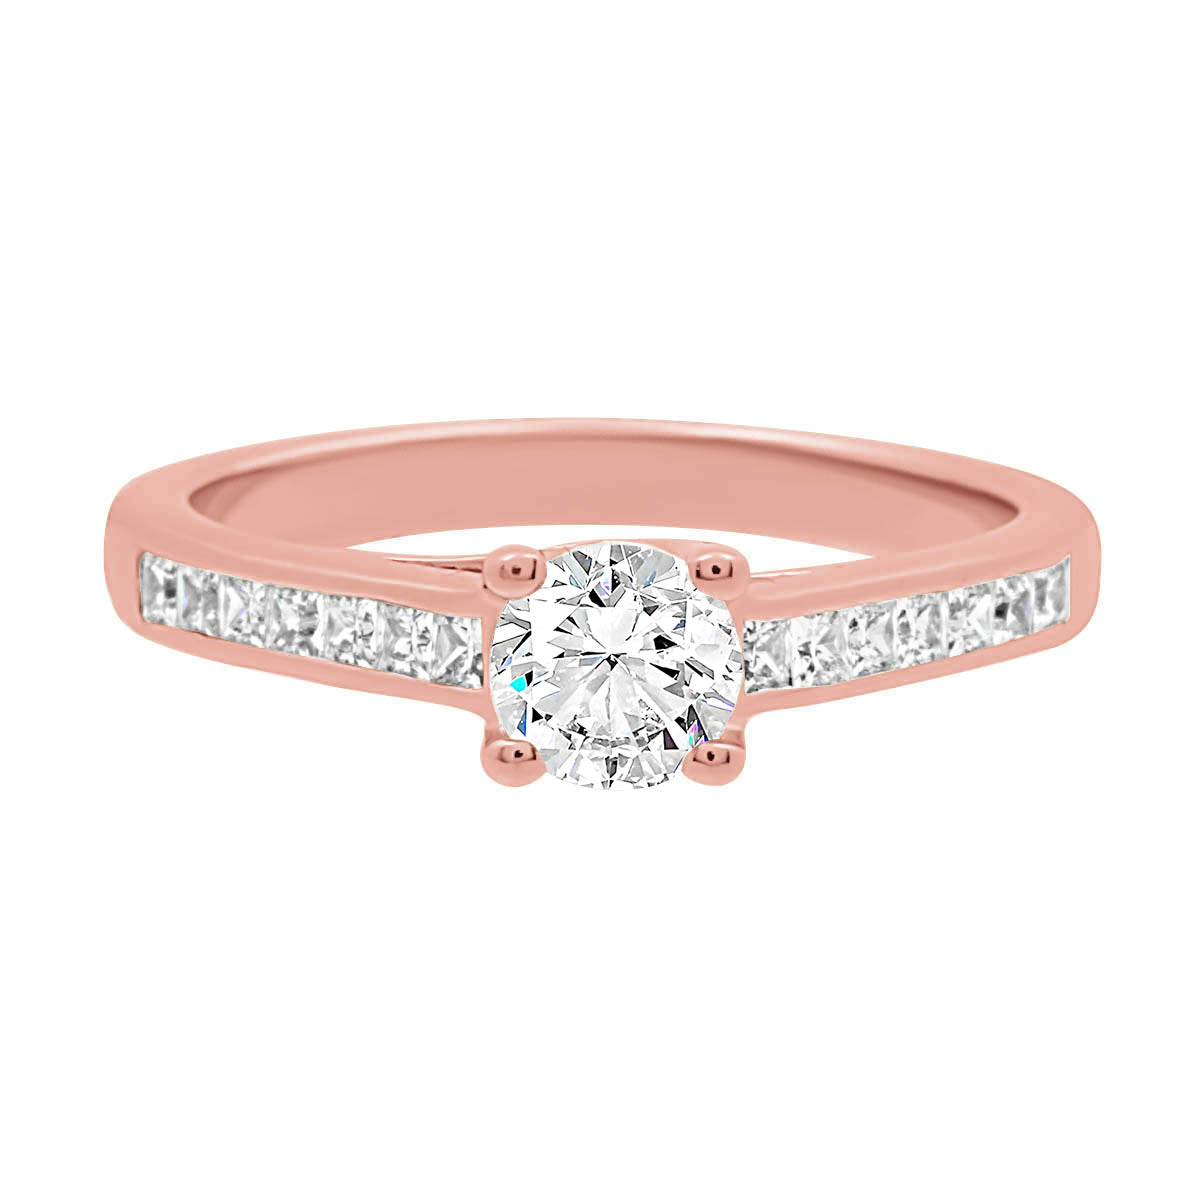 Round Diamond with Channel Set Princess Cut Diamonds in rose gold